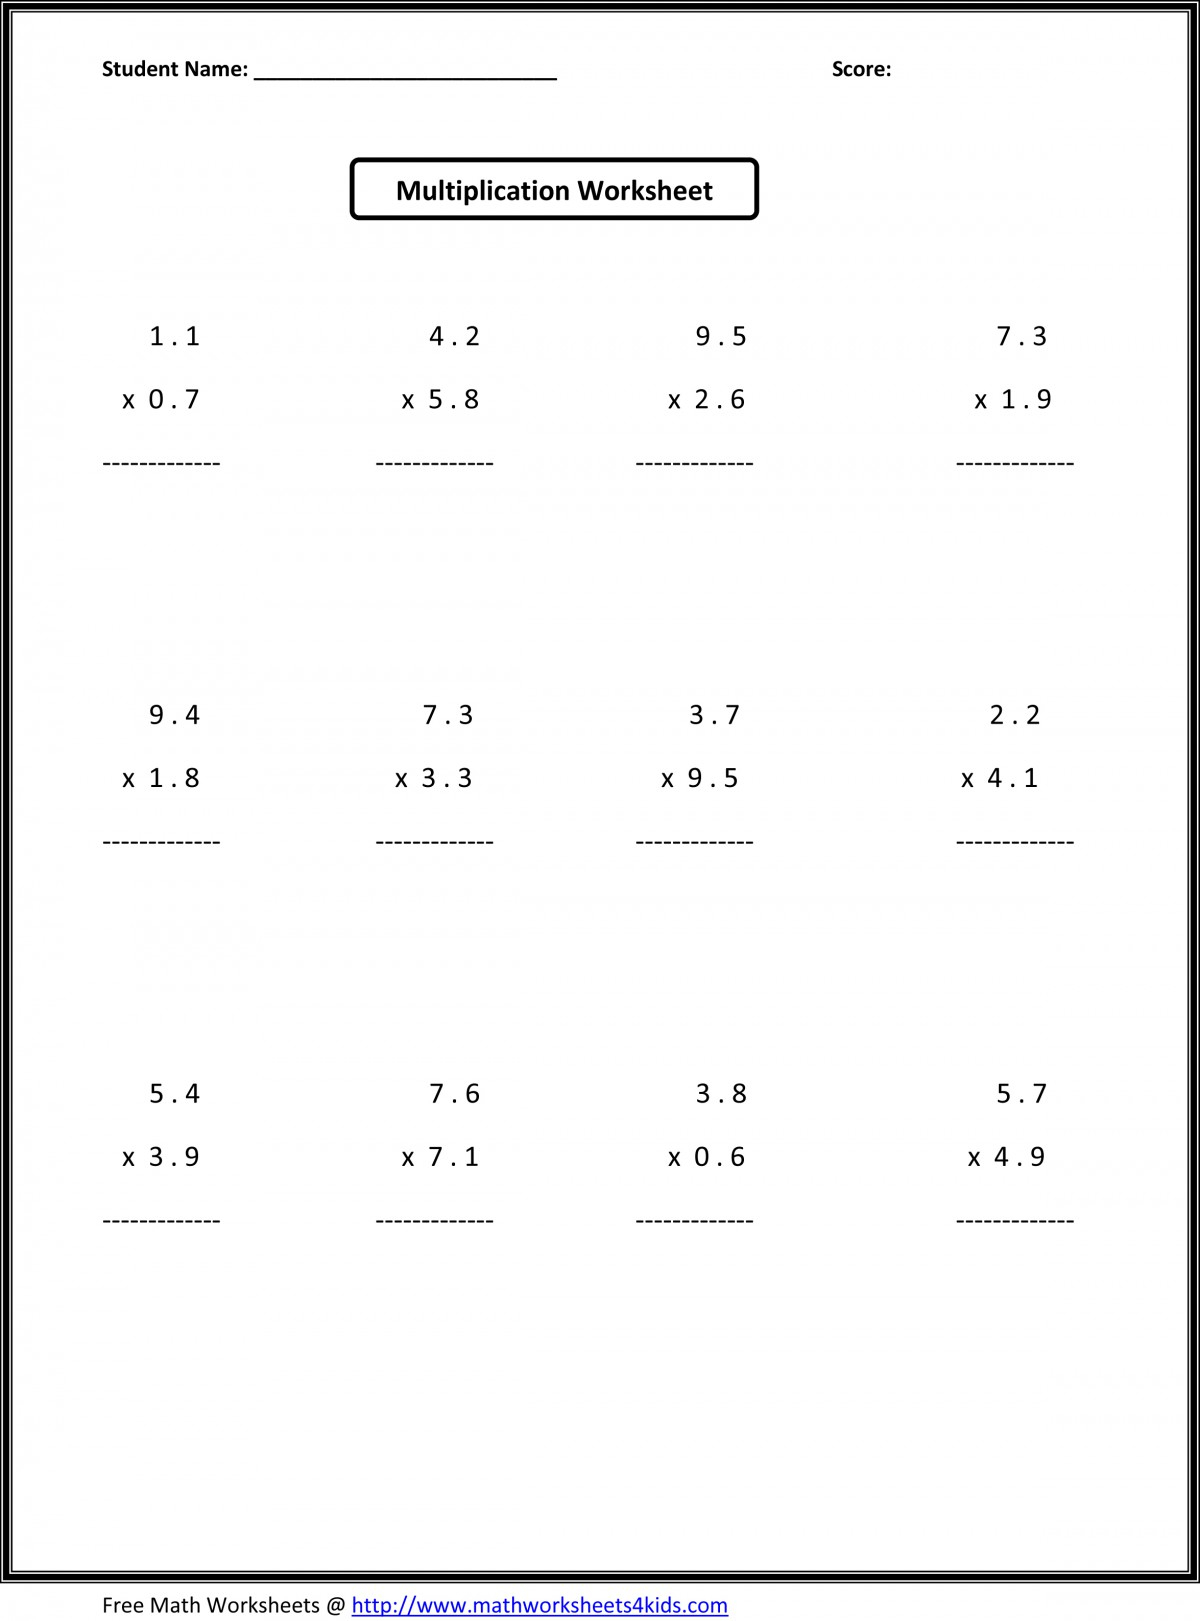 Math Worksheet For 7 Year Olds Free | Printable Worksheets in Printable Multiplication Worksheets 7's And 8's